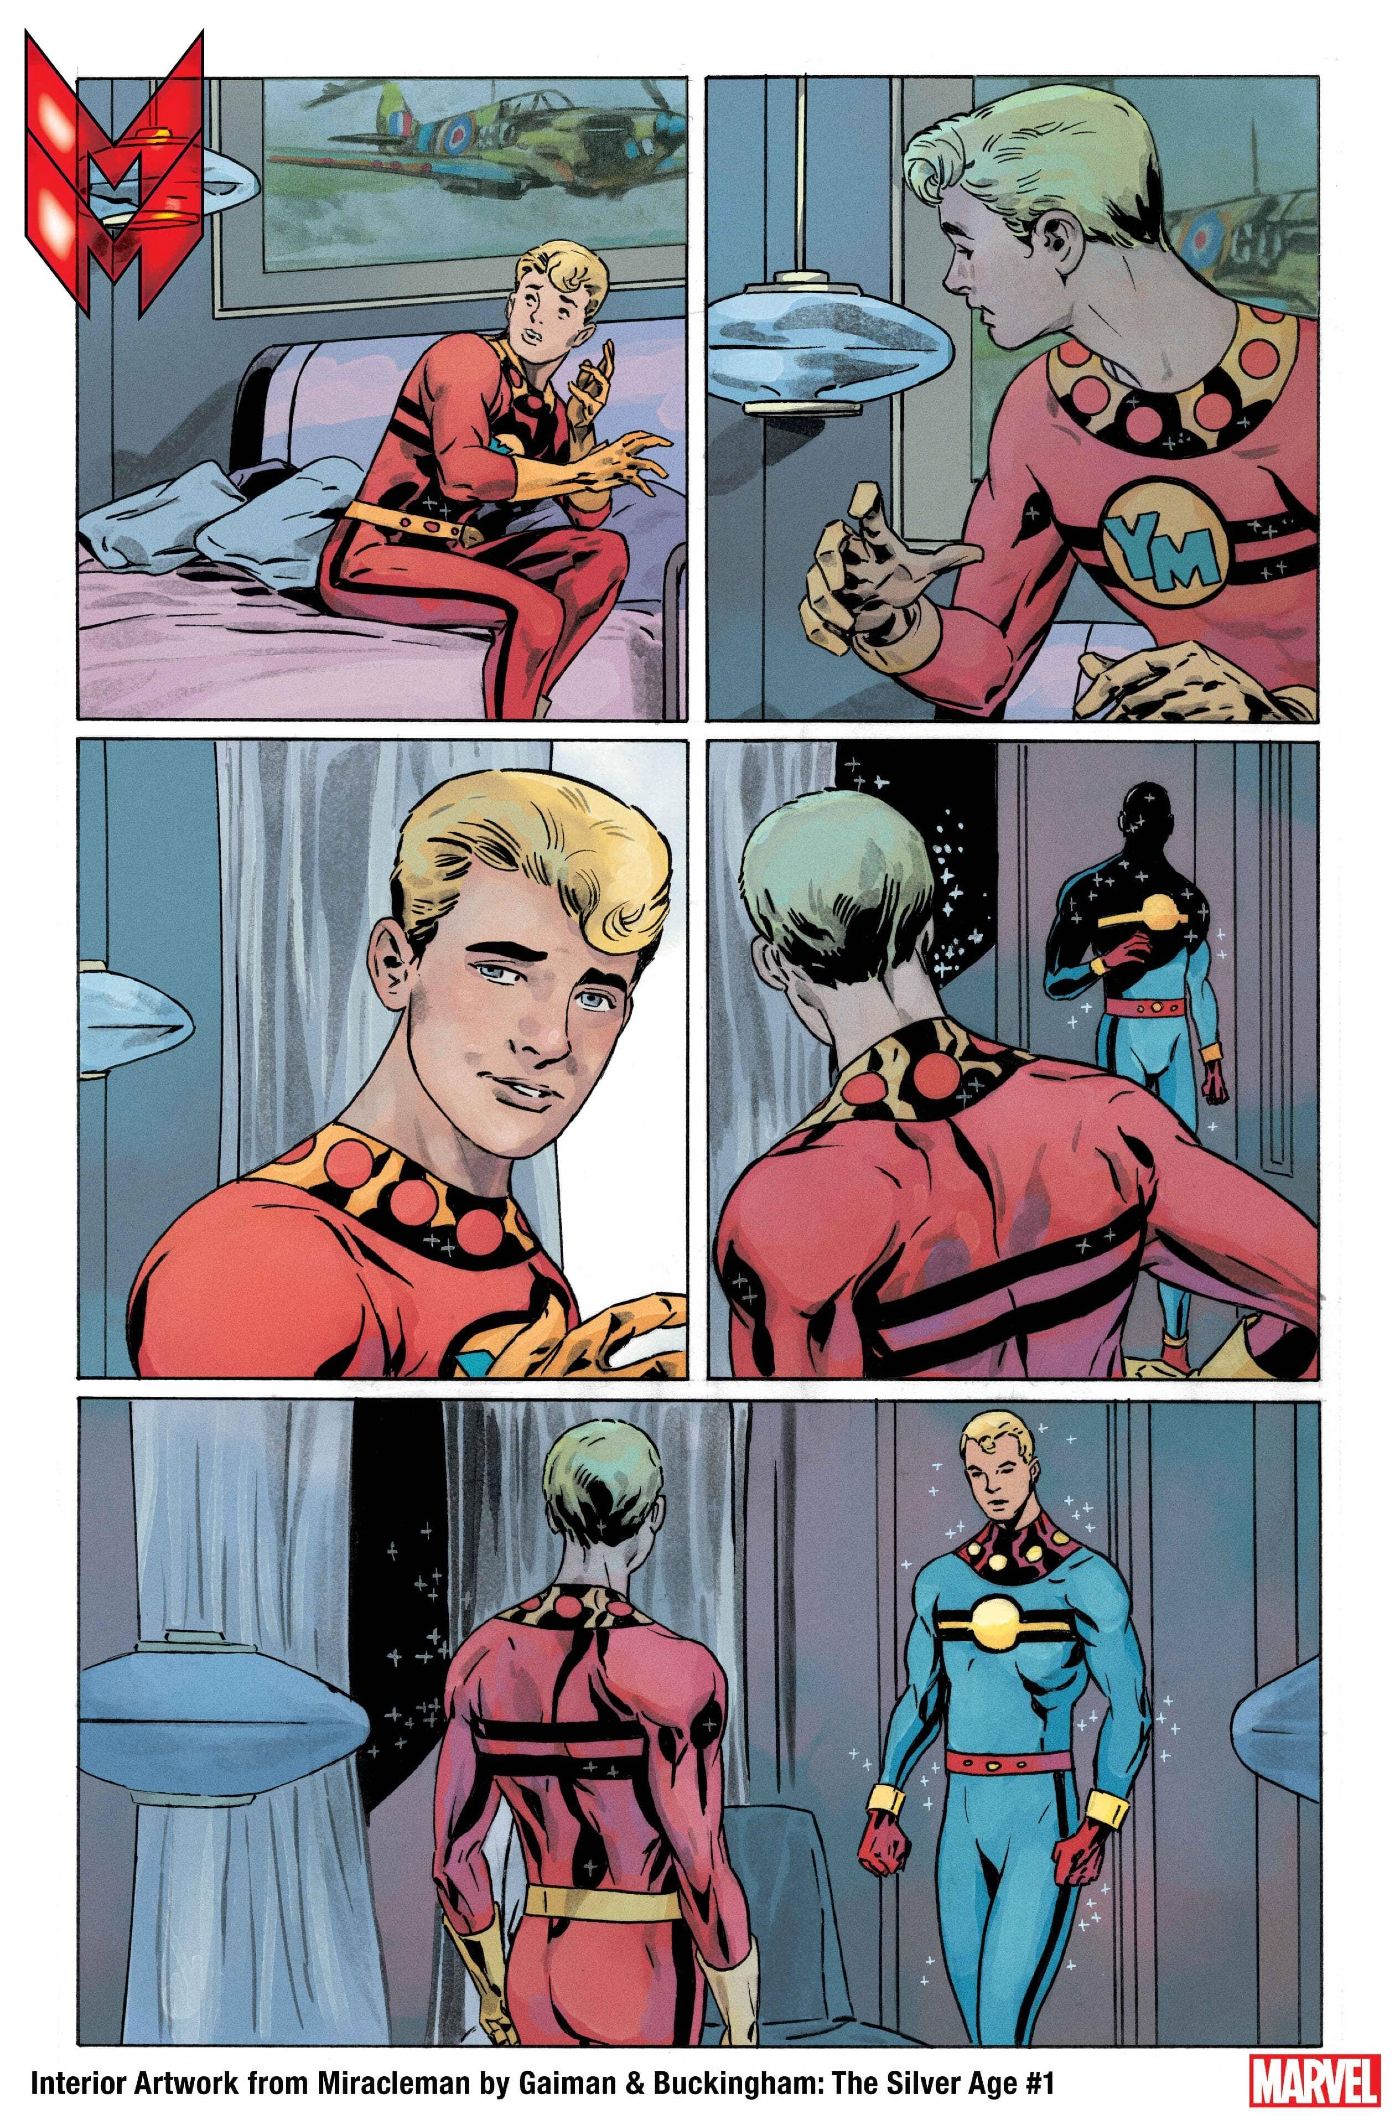 Marvel-Miracleman-preview-page-4